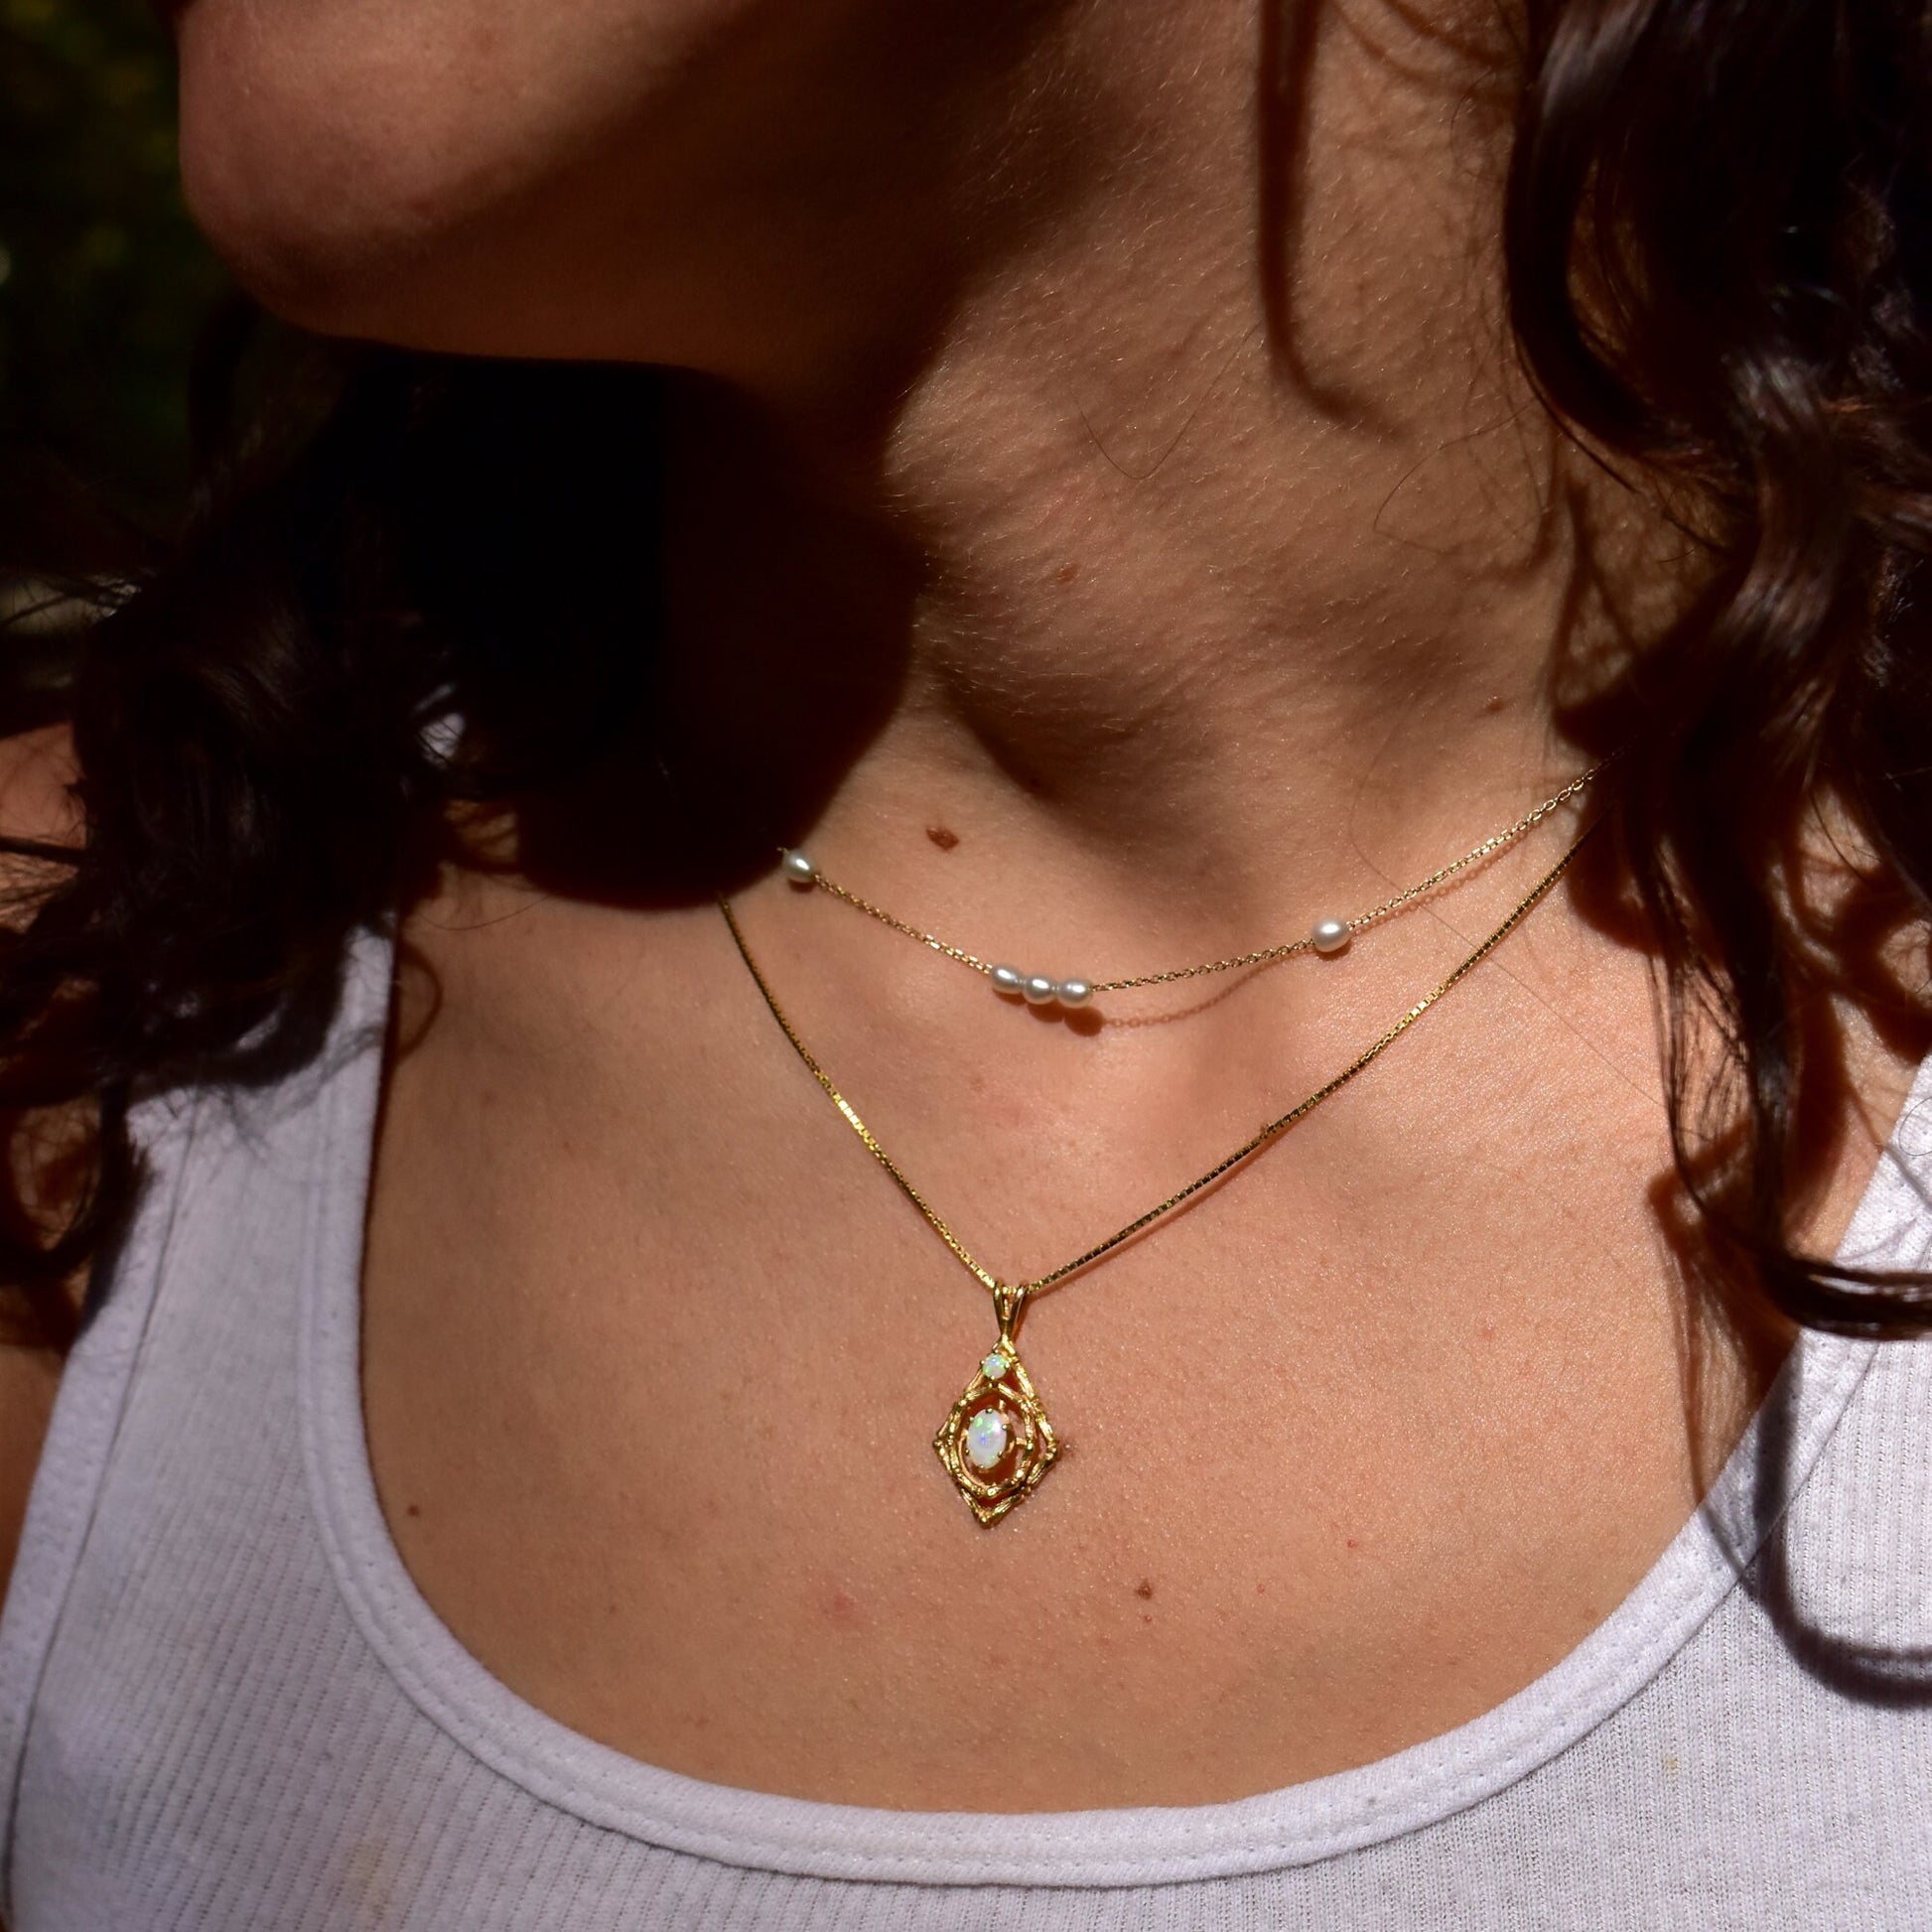 10K yellow gold opal pendant necklace with bamboo motif and two white opal cabochon stones, worn by a person with curly brown hair, cropped image showing neck and upper chest.